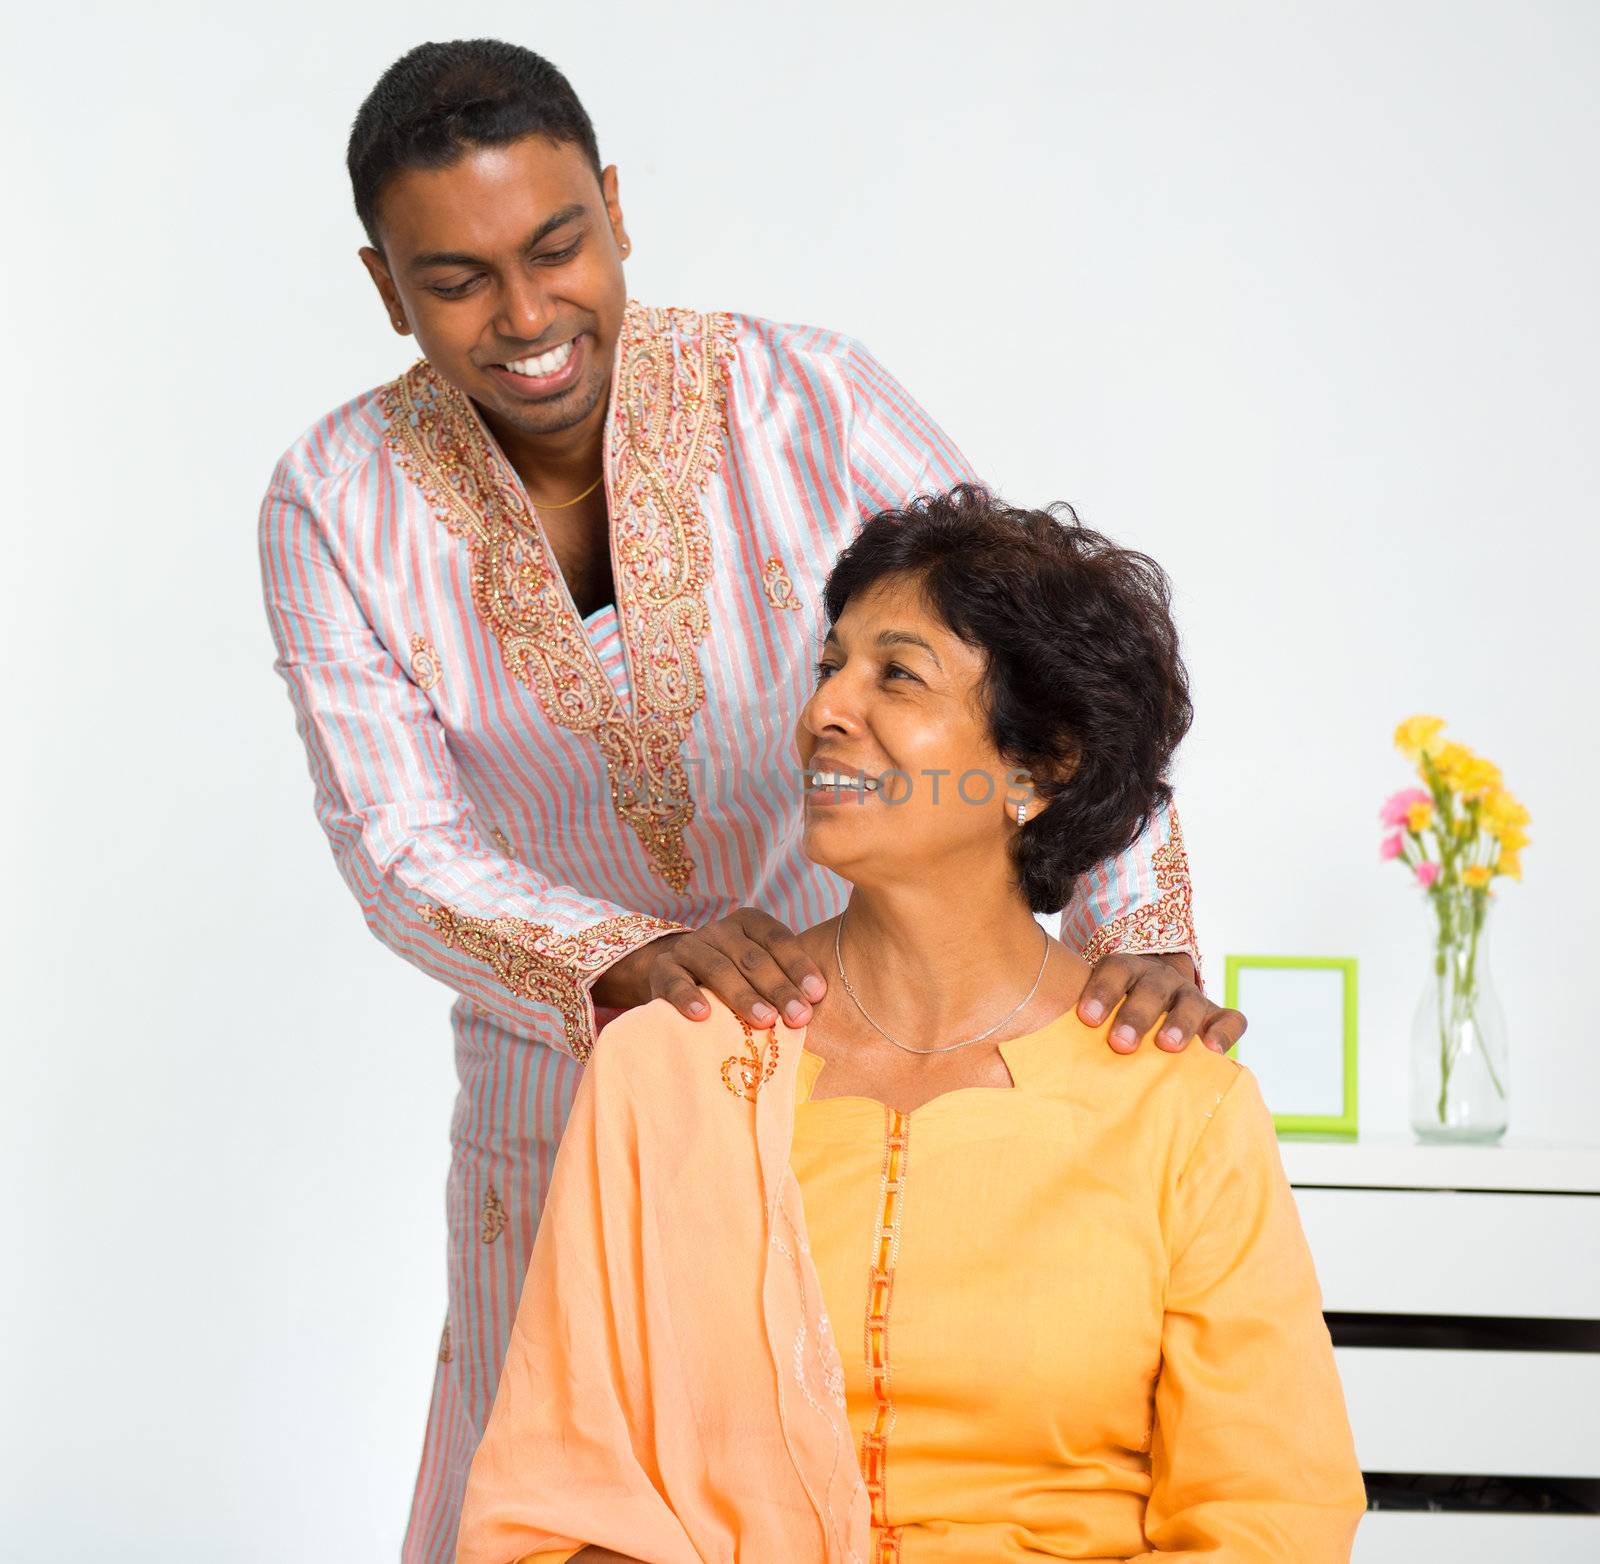 A lovely mature Indian woman enjoying a shoulder massage from her son at home